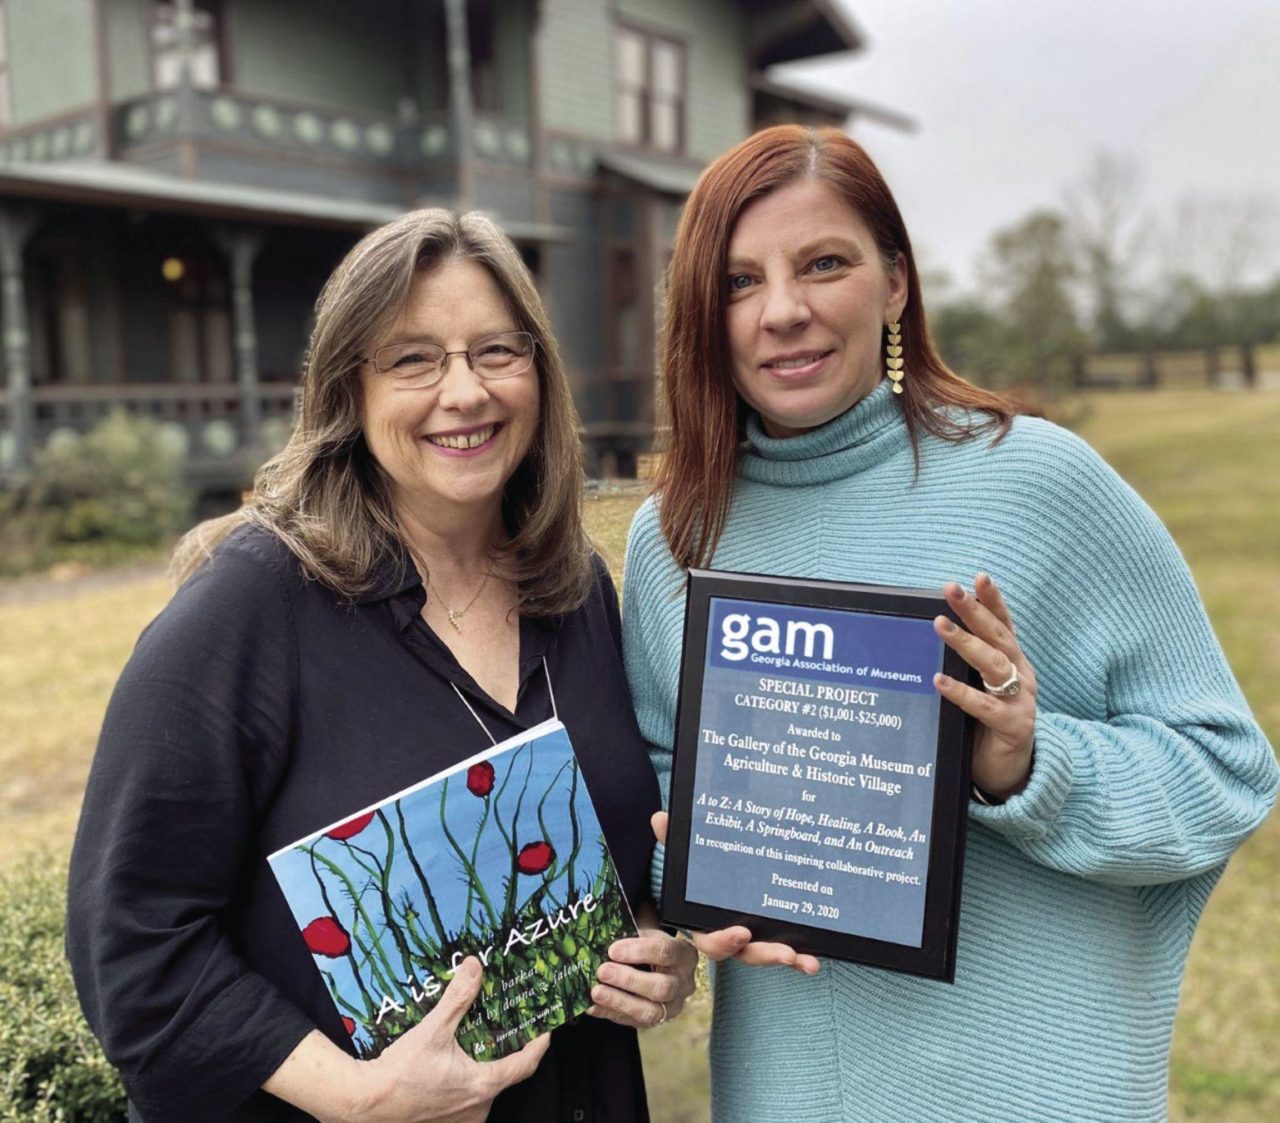 Donna Falcone (left) and Polly Huff with the GAM award for “A to Z.”